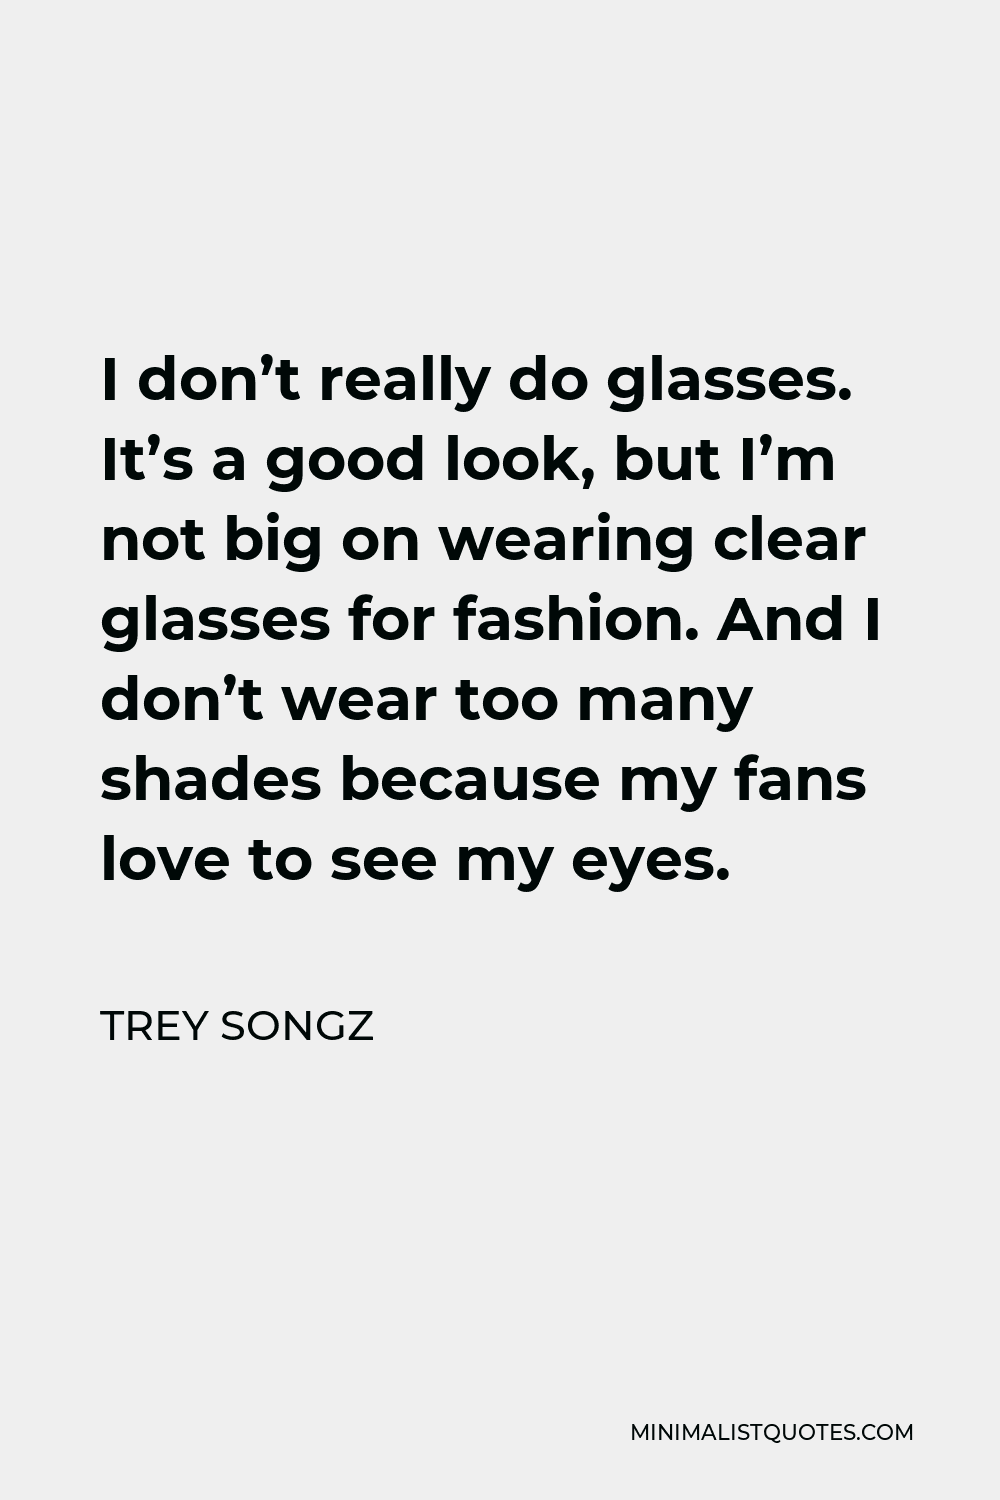 Trey Songz Quote - I don’t really do glasses. It’s a good look, but I’m not big on wearing clear glasses for fashion. And I don’t wear too many shades because my fans love to see my eyes.